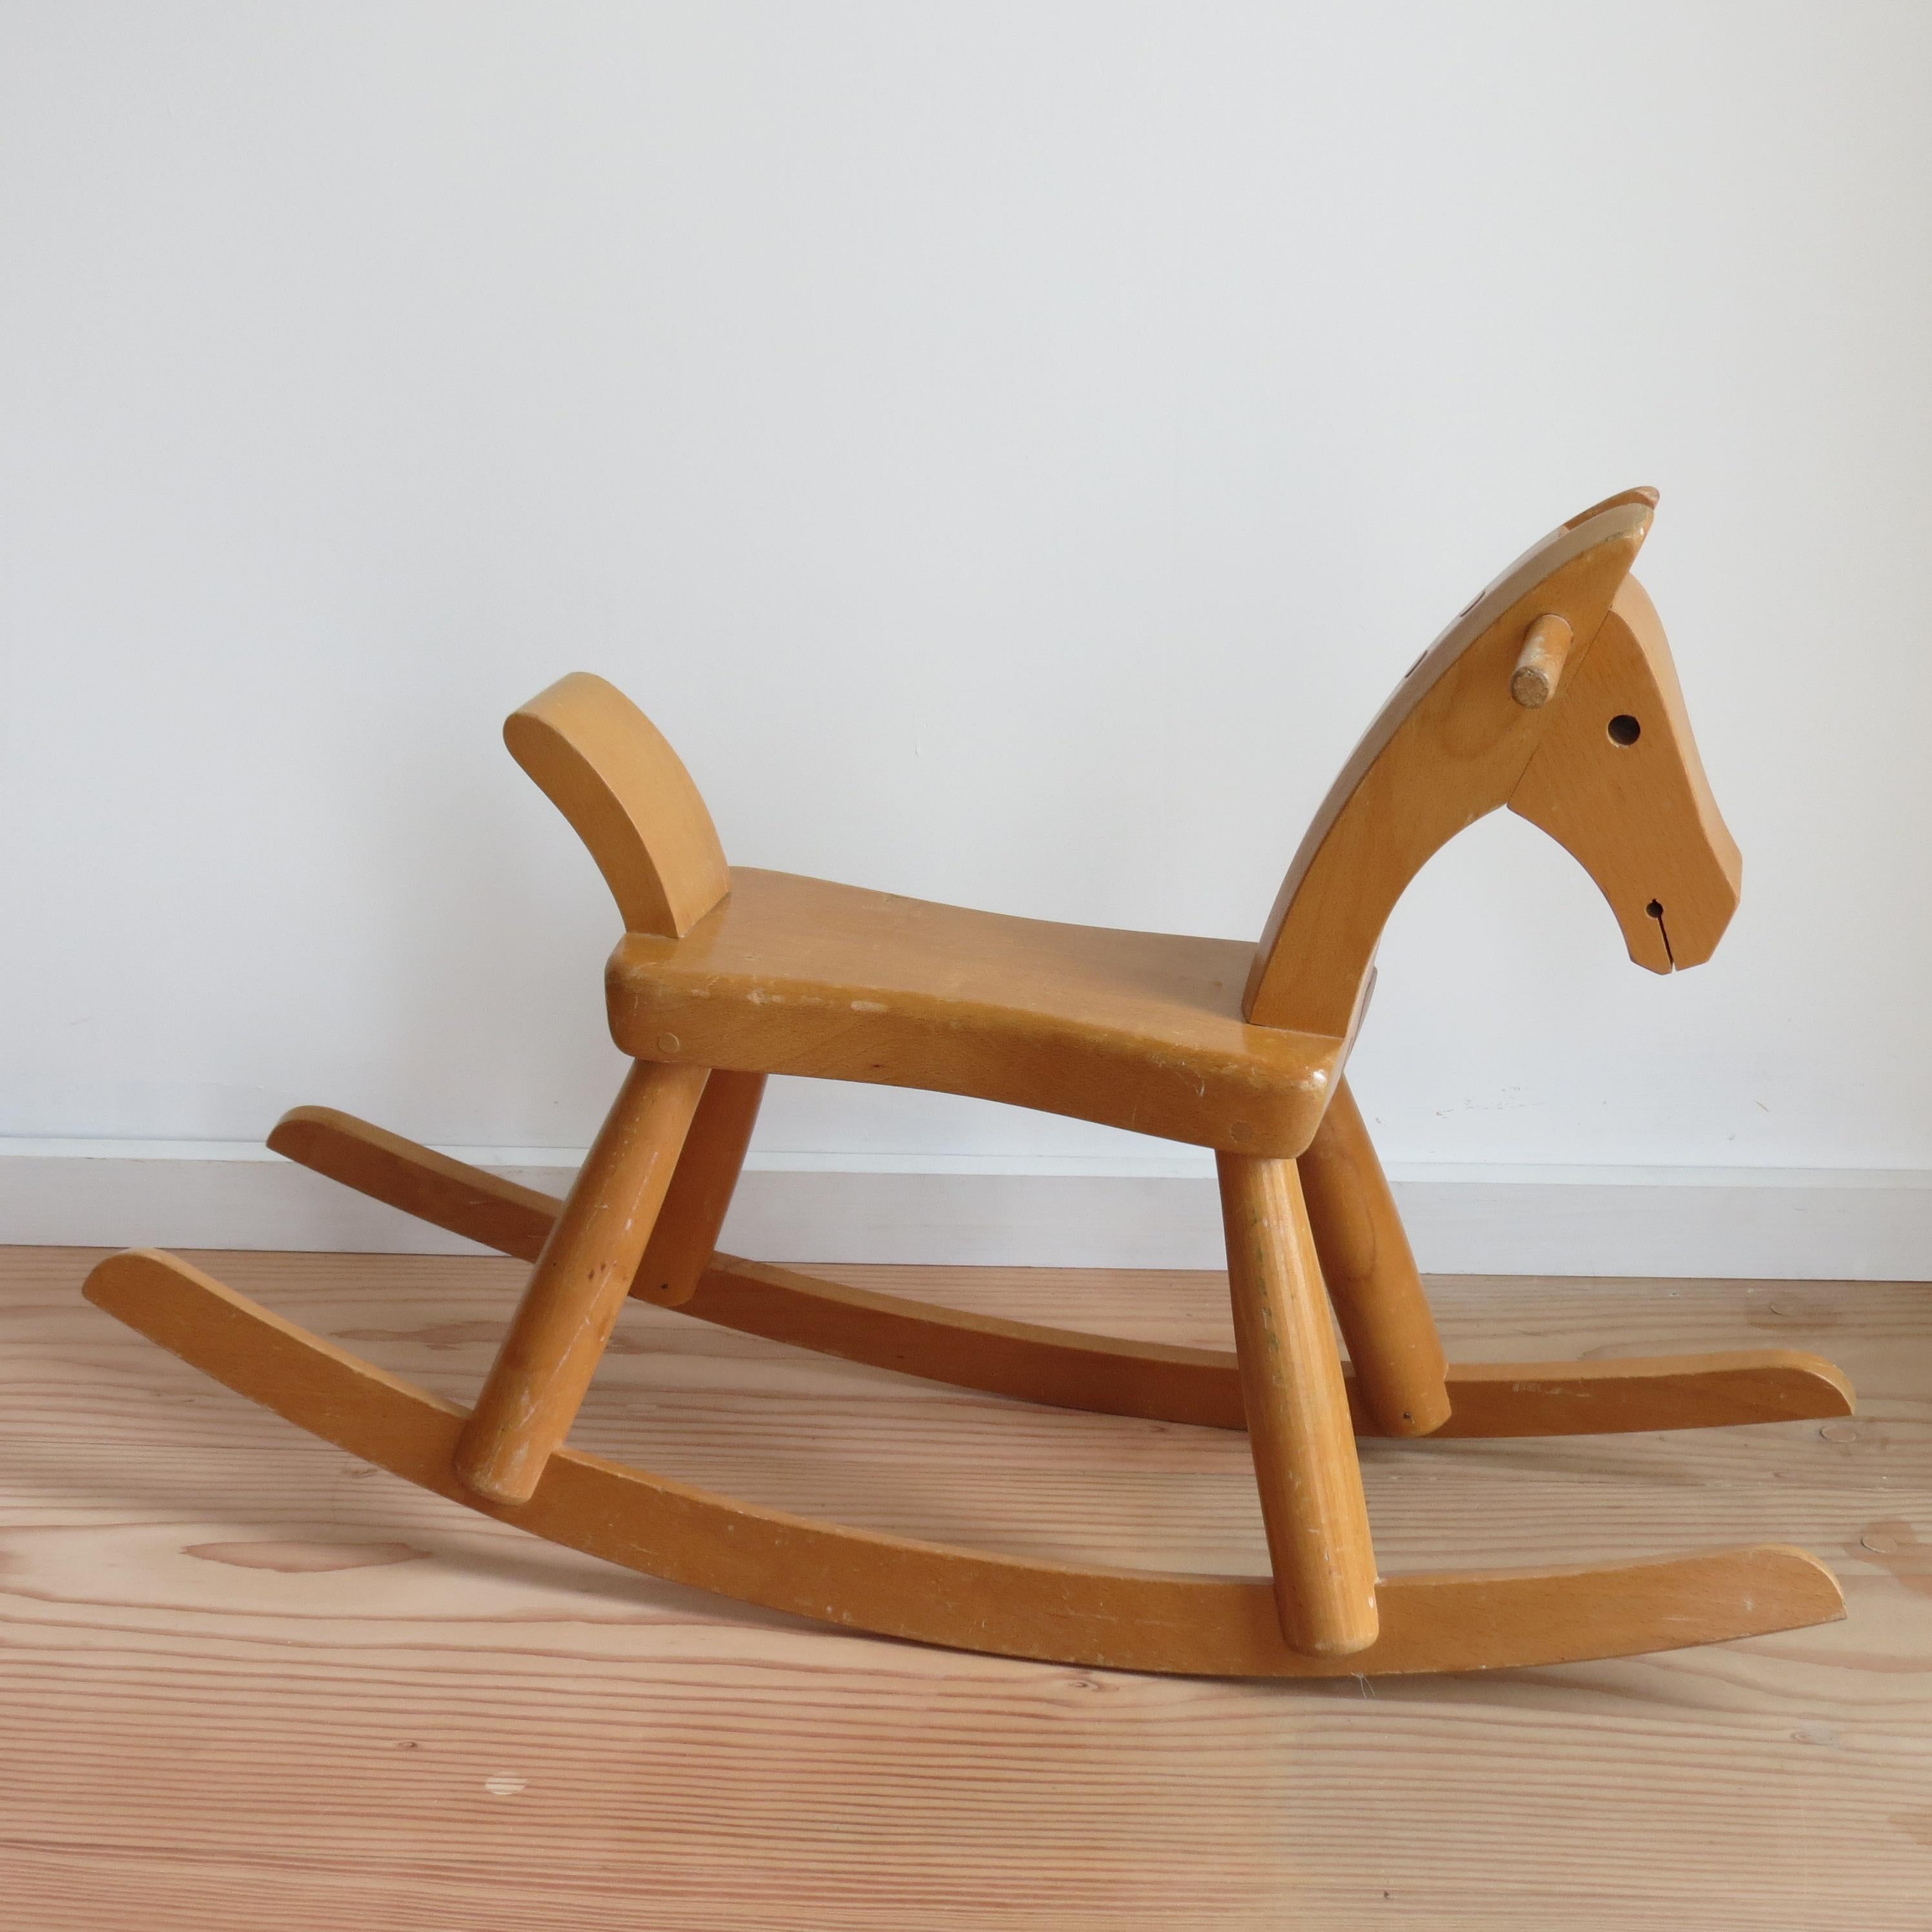 Original vintage Kay Bojesen rocking horse. Made from solid beech with a lacquered finish. Stamped to underside Kay Bojesen, Denmark.
Original design 1936

Measures: 77cm x 24cm wide by 47cm tall 
Seat height 26cm.
 